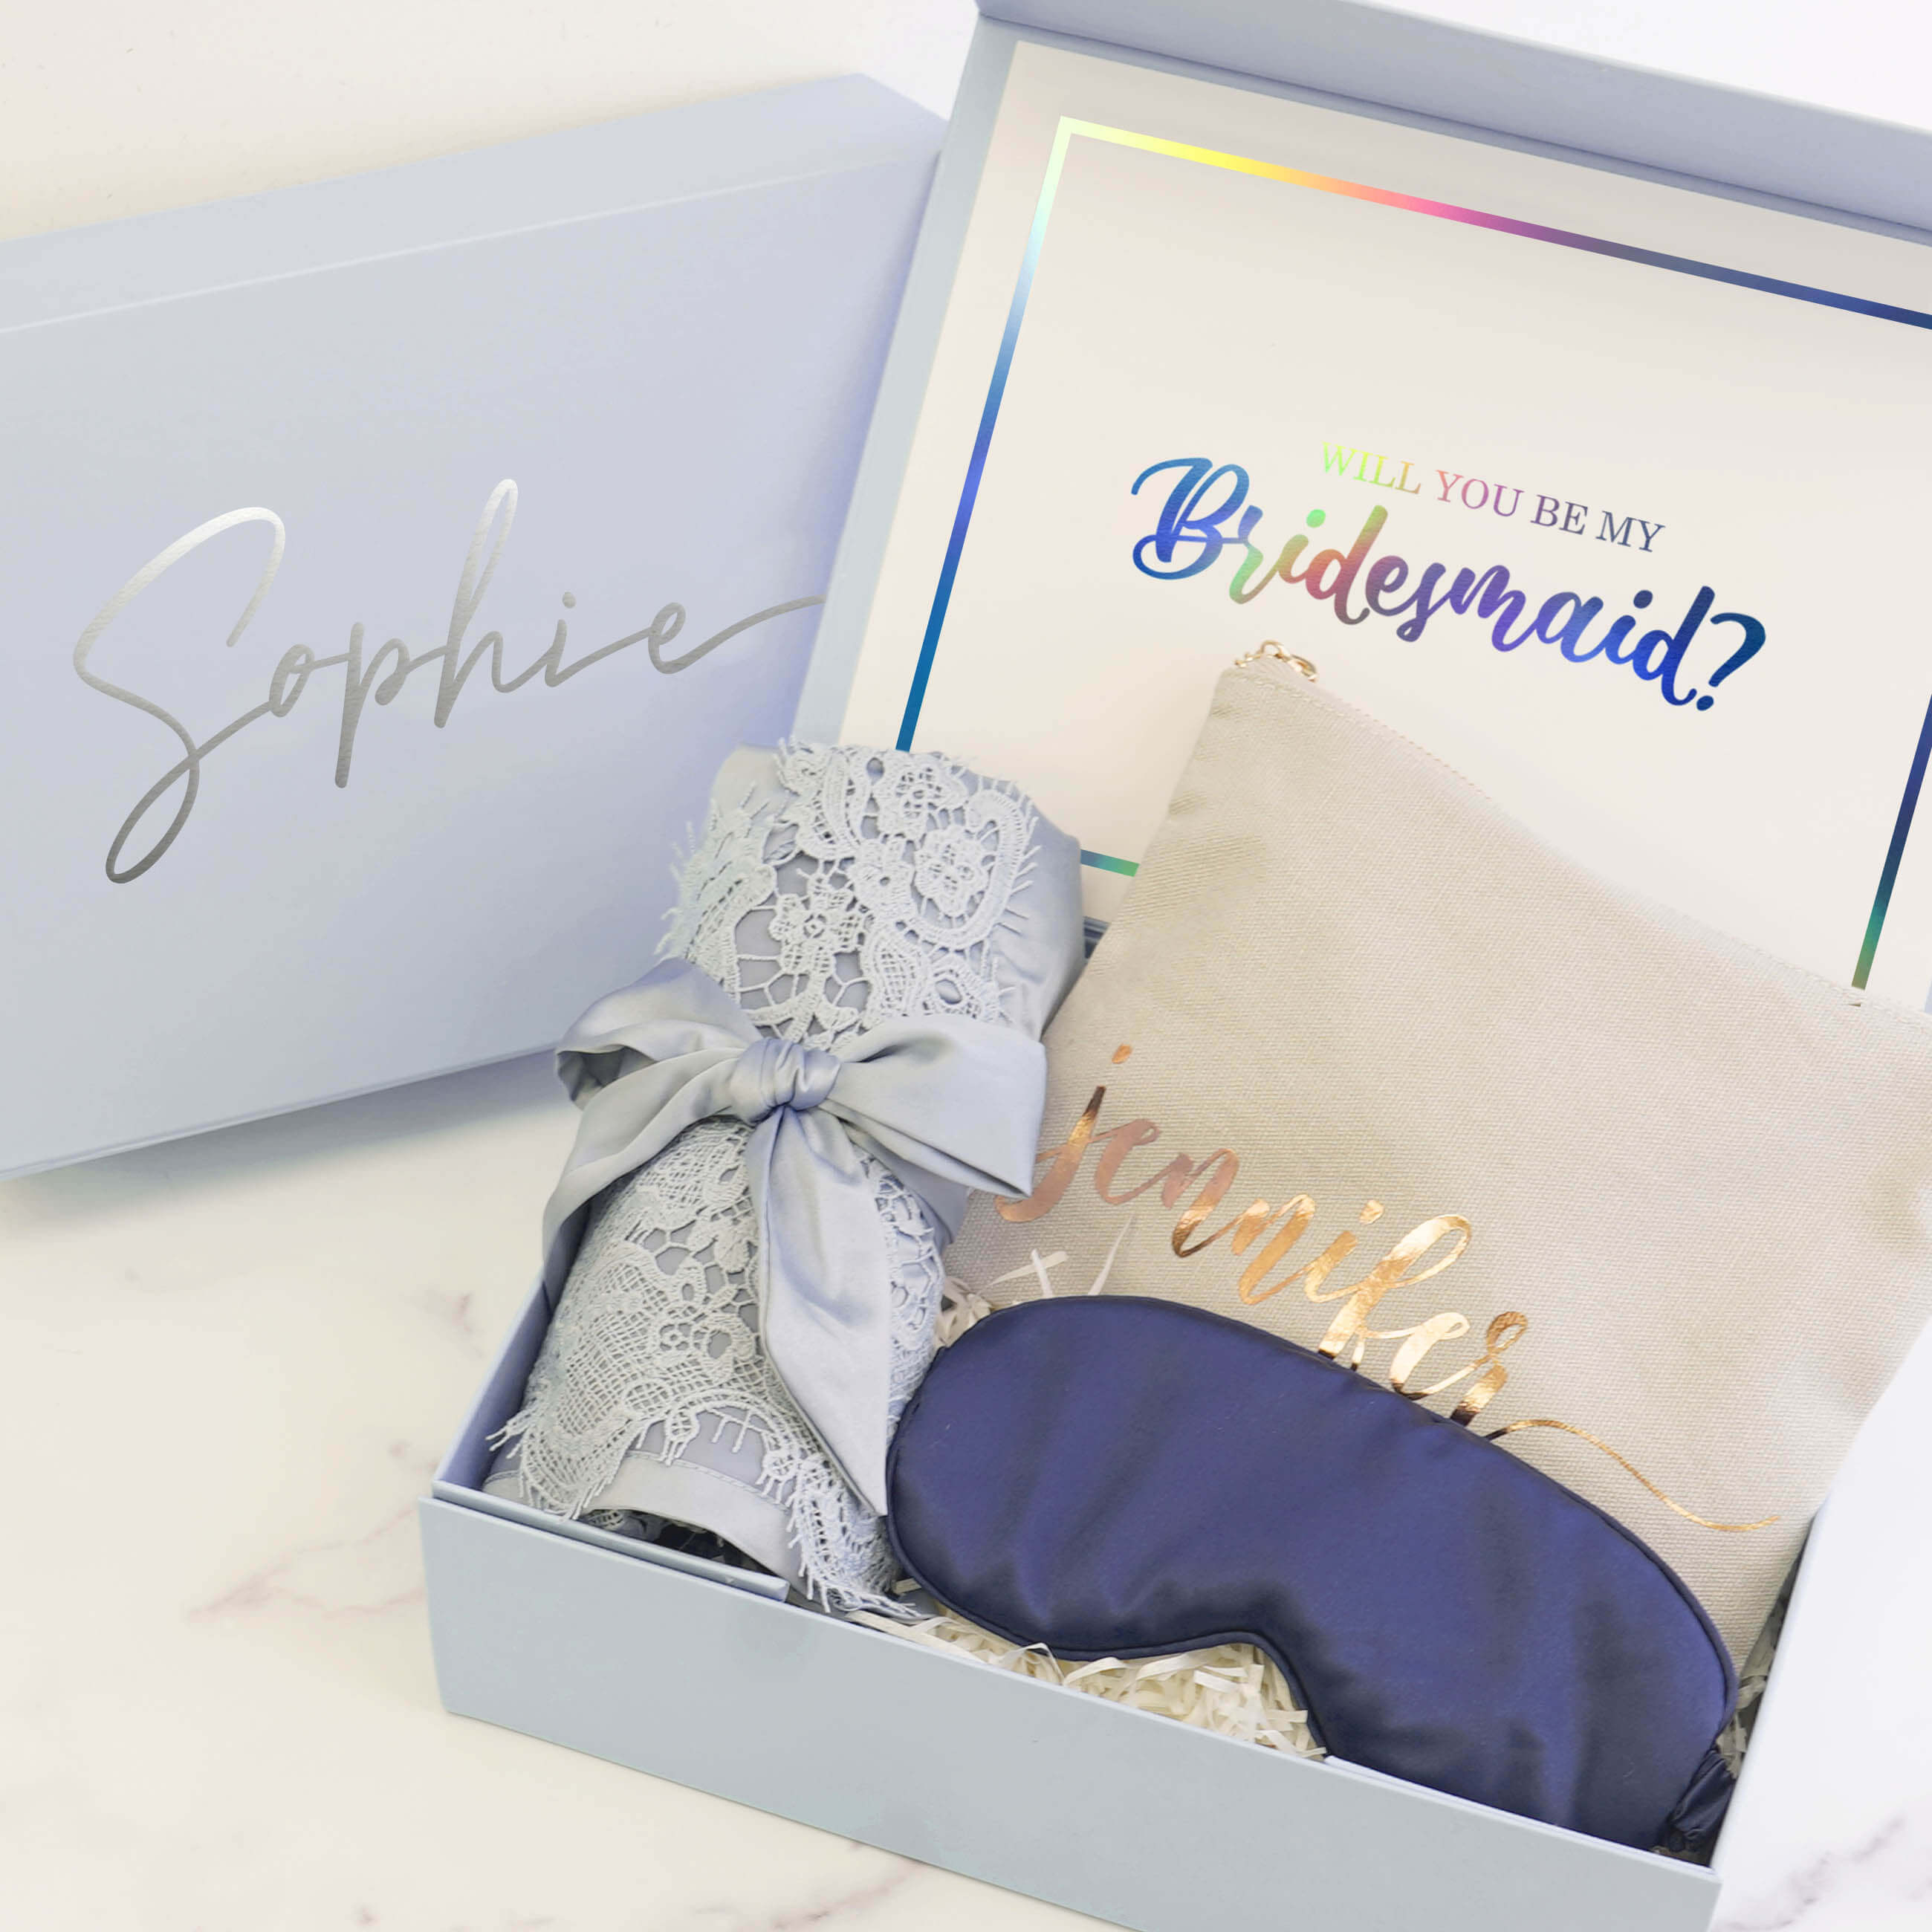 Bridesmaids Gift Box - Dusty Blue Personalized Bridesmaid Proposal Box with customized gifts, included name, message card, robe, makeup bag, sleep mask.